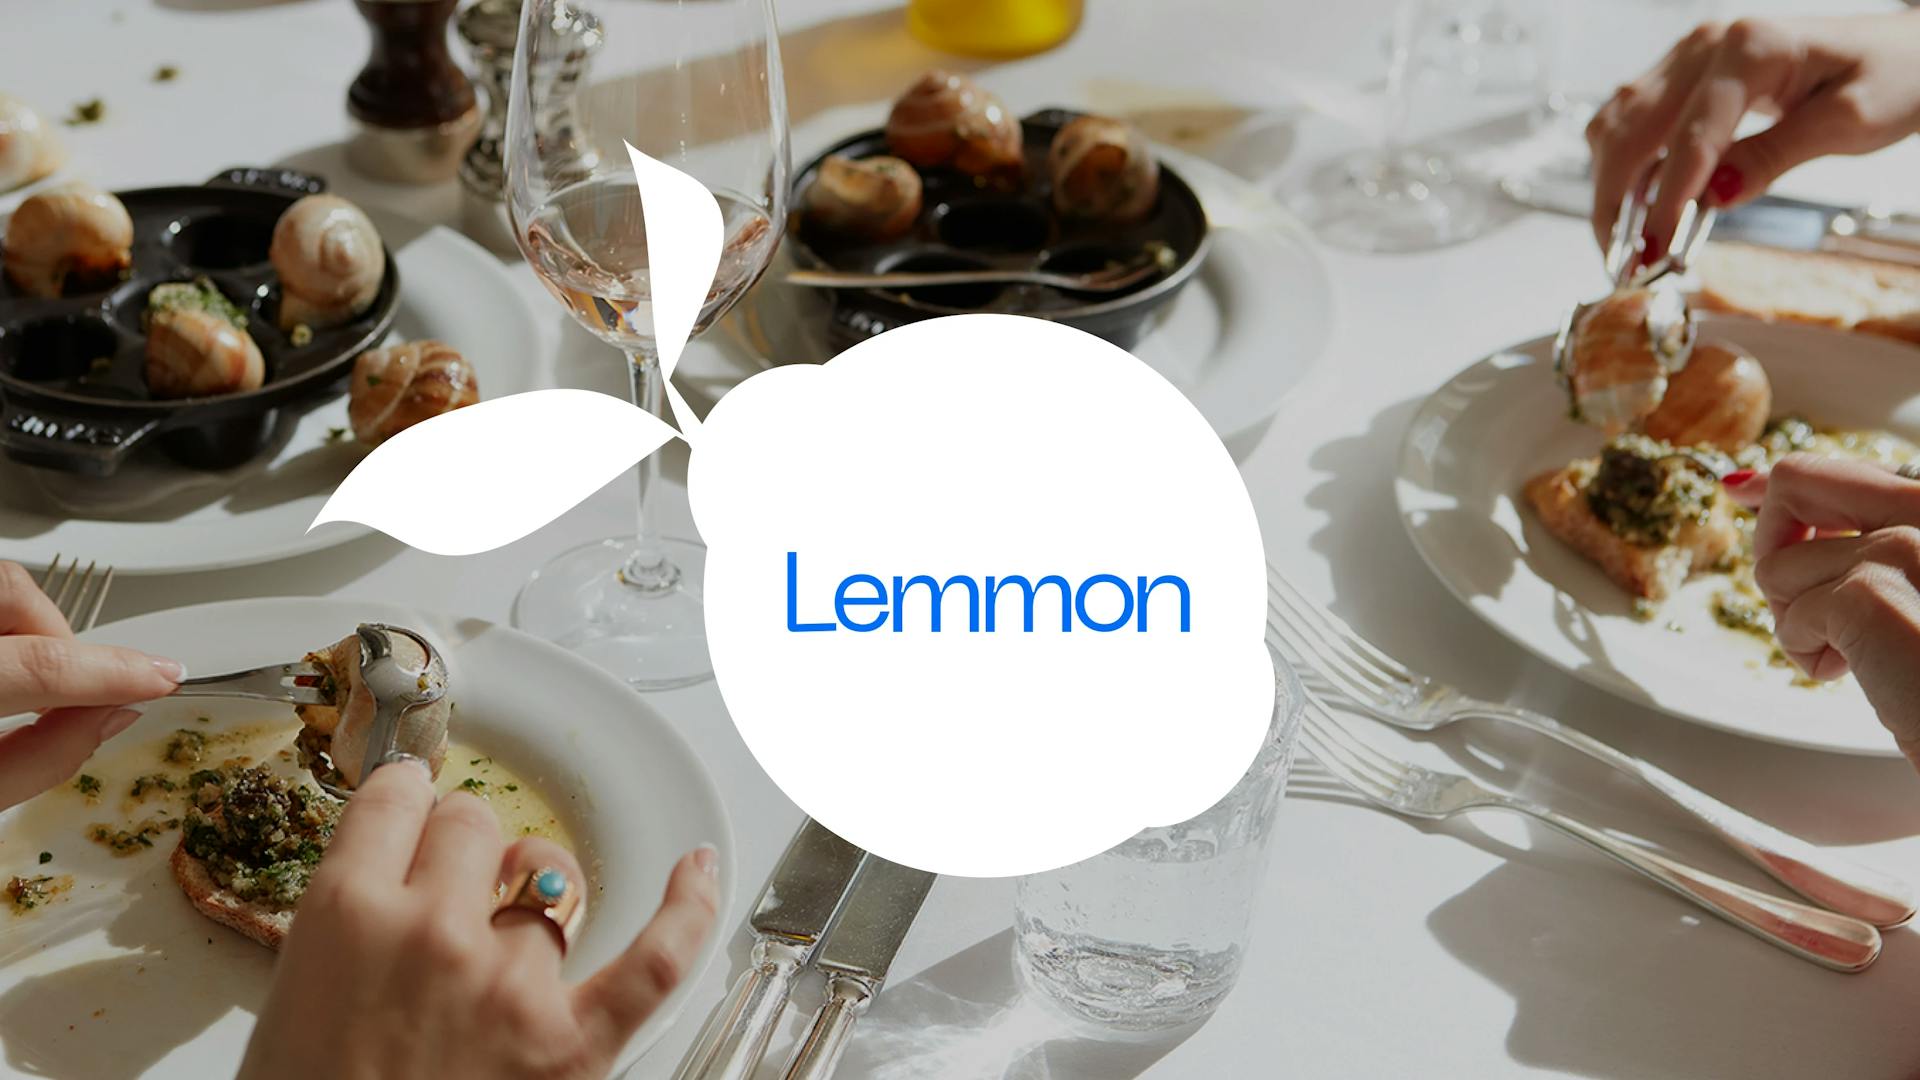 Lemmon branding over image of people dining at restaurant